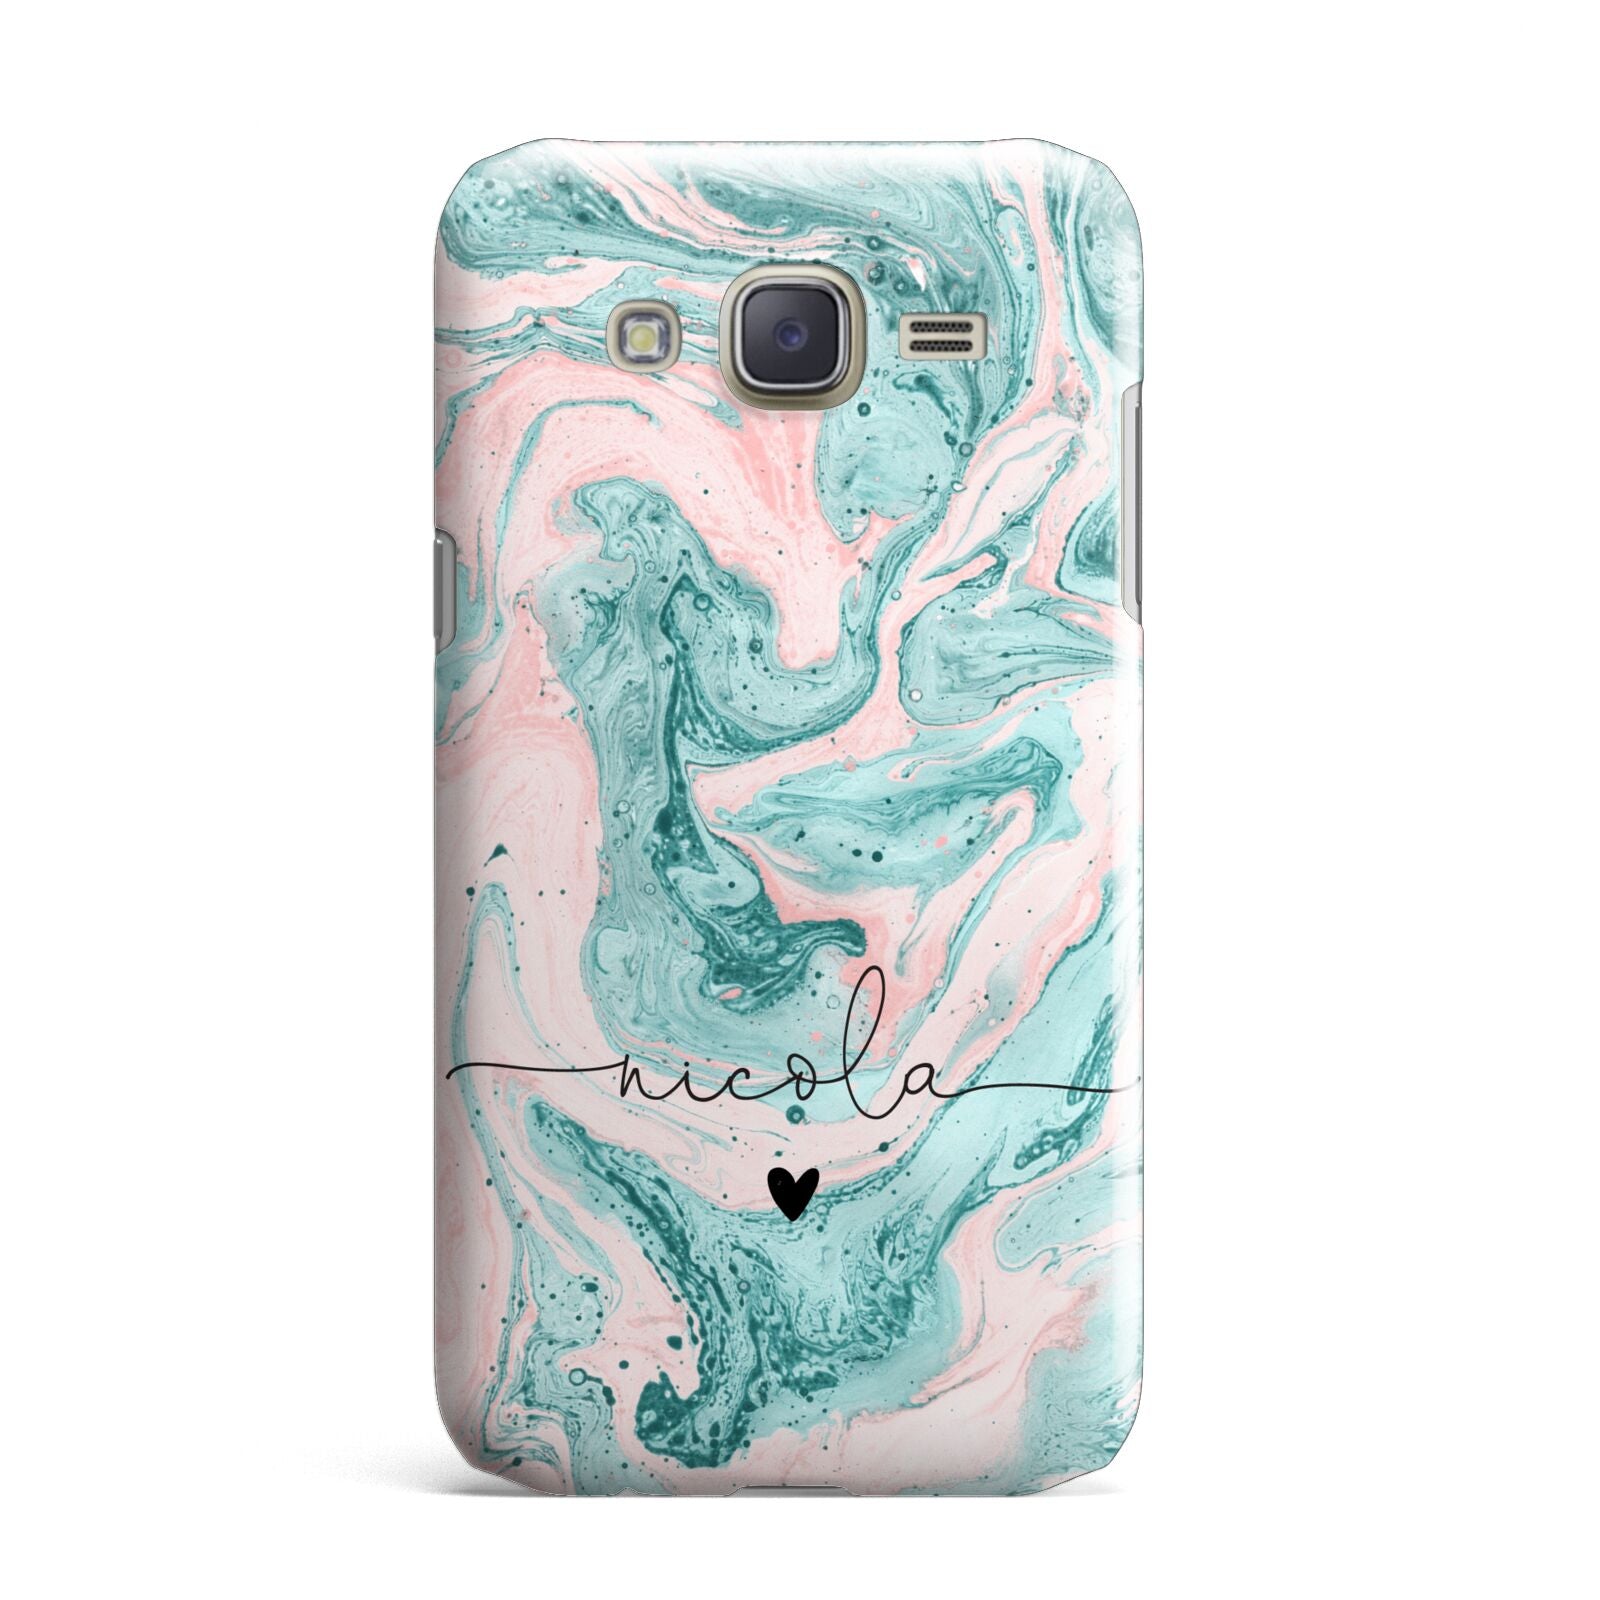 Personalised Name Green Swirl Marble Samsung Galaxy J7 Case